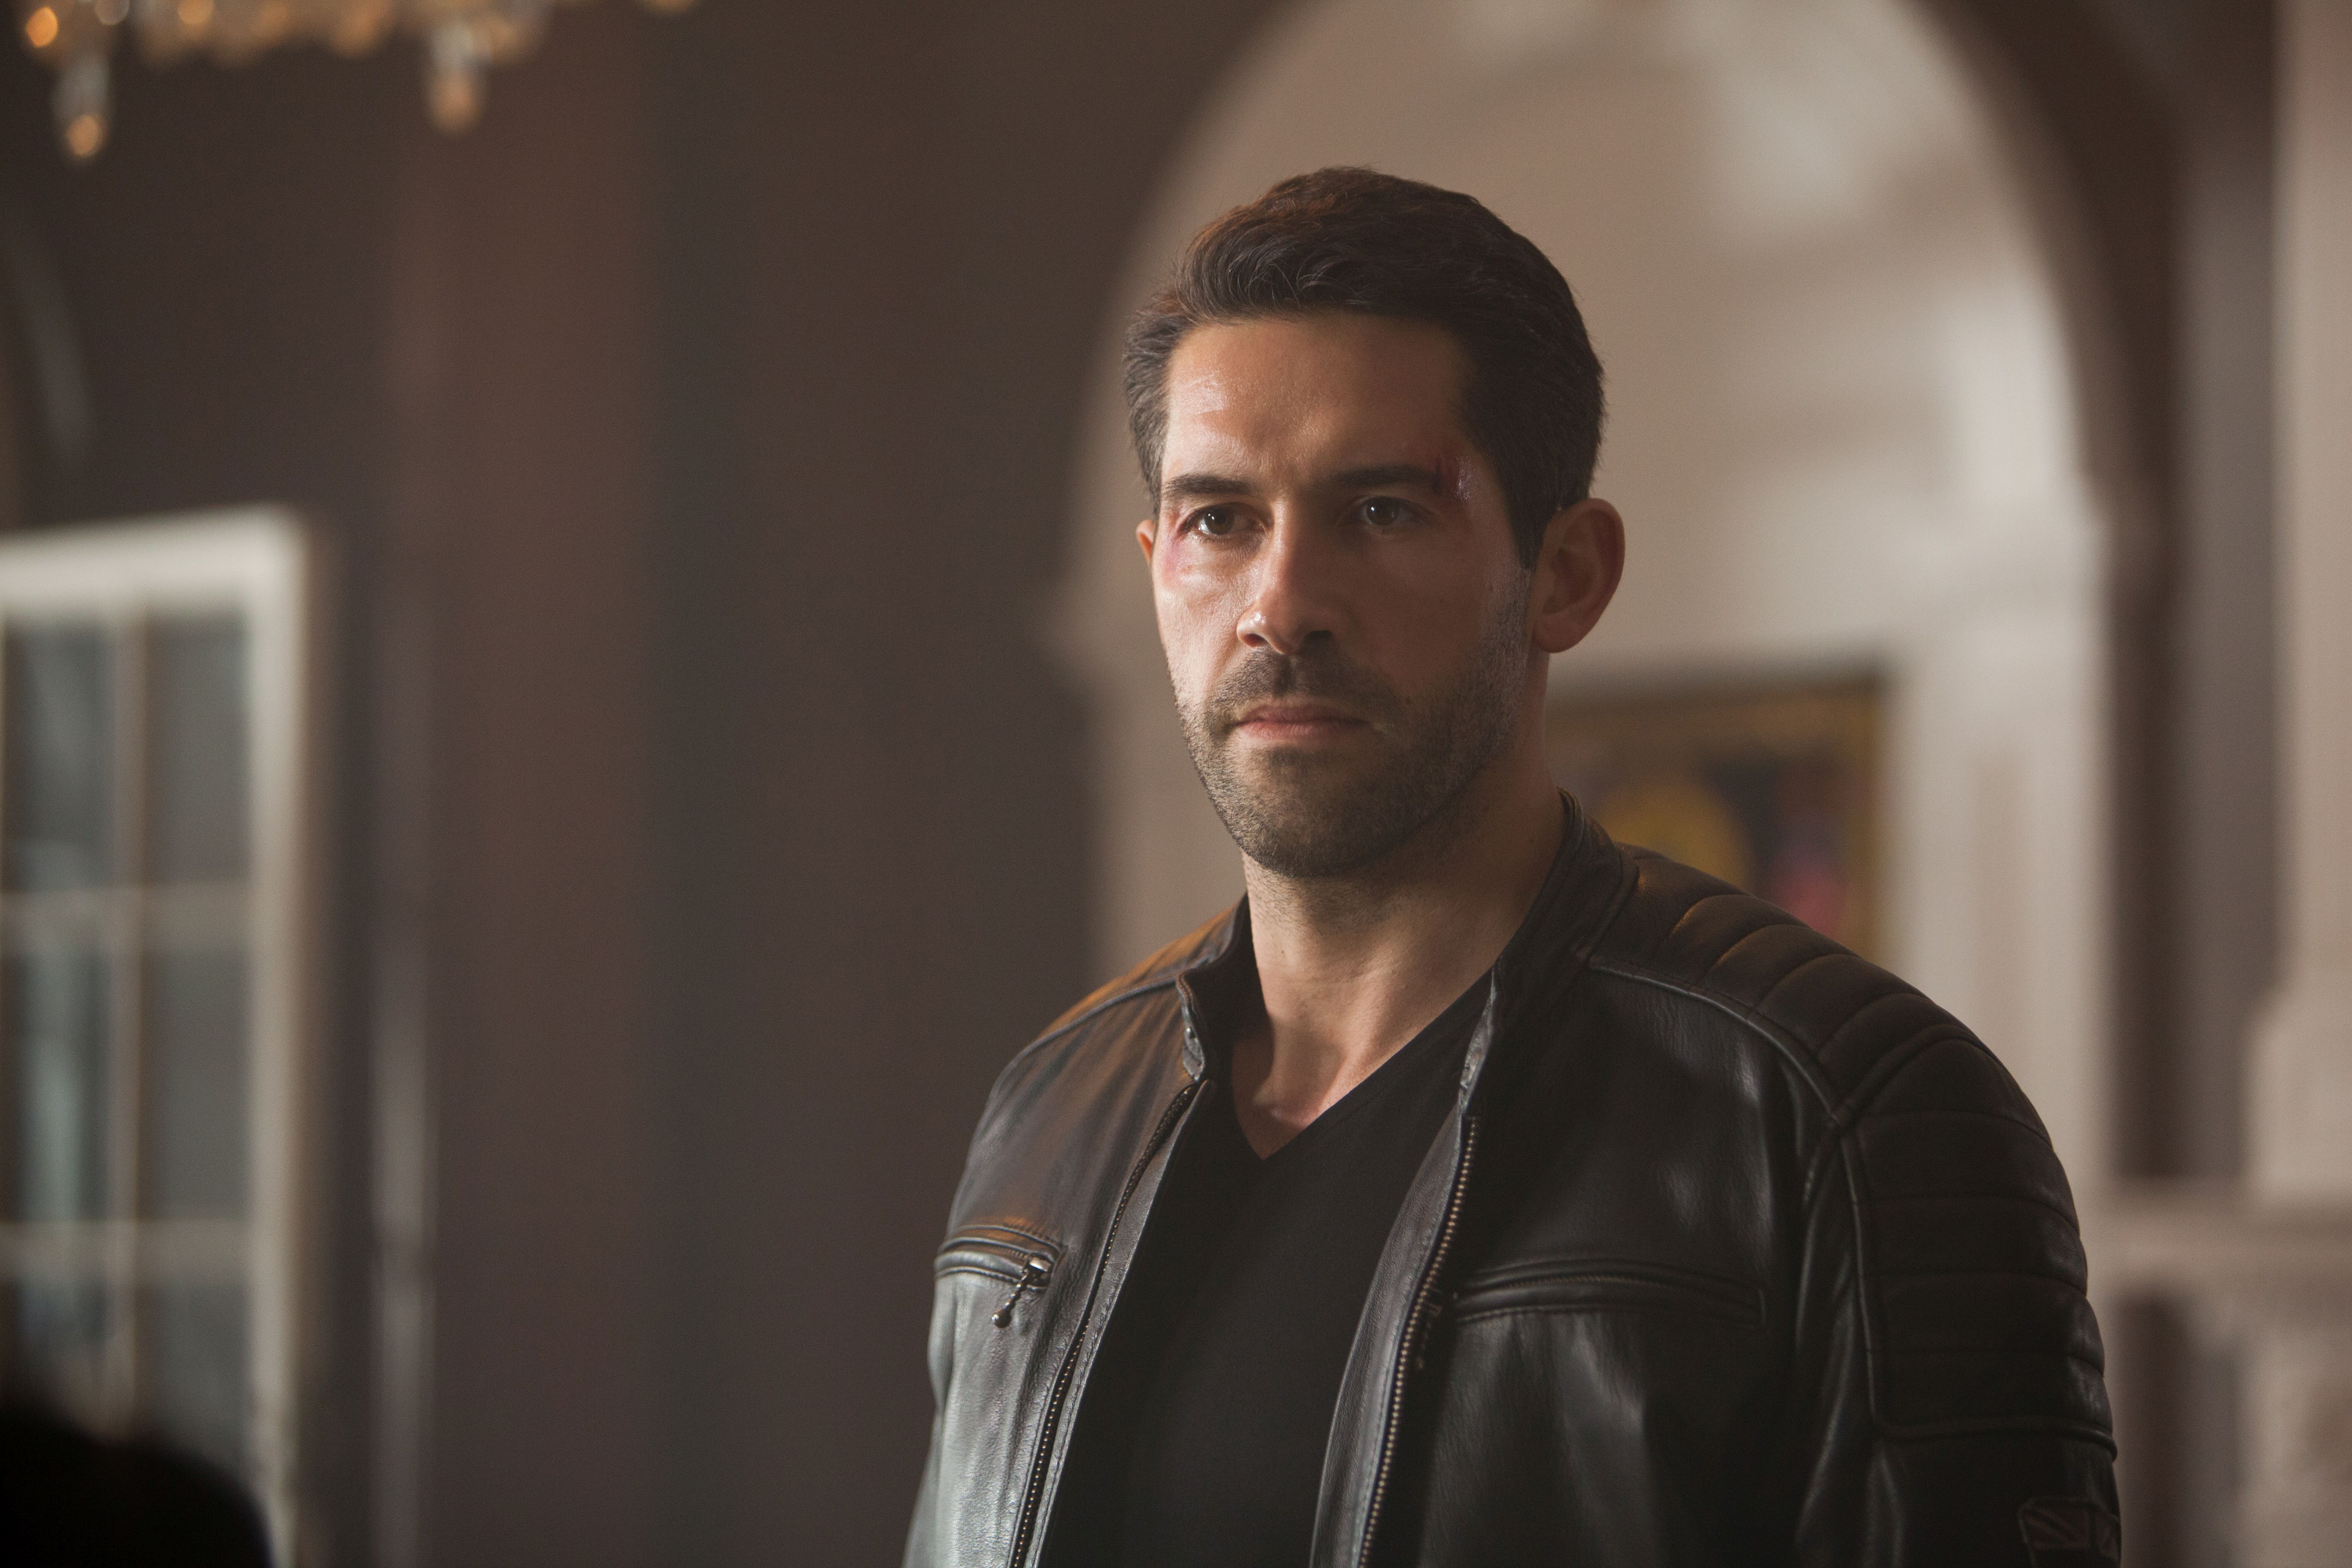 – and Accident Scott Adkins the SF, Man: Spy-fi! Horror of Exploring Bulletin: Fantasy, Sci-Fi Universes Interview: